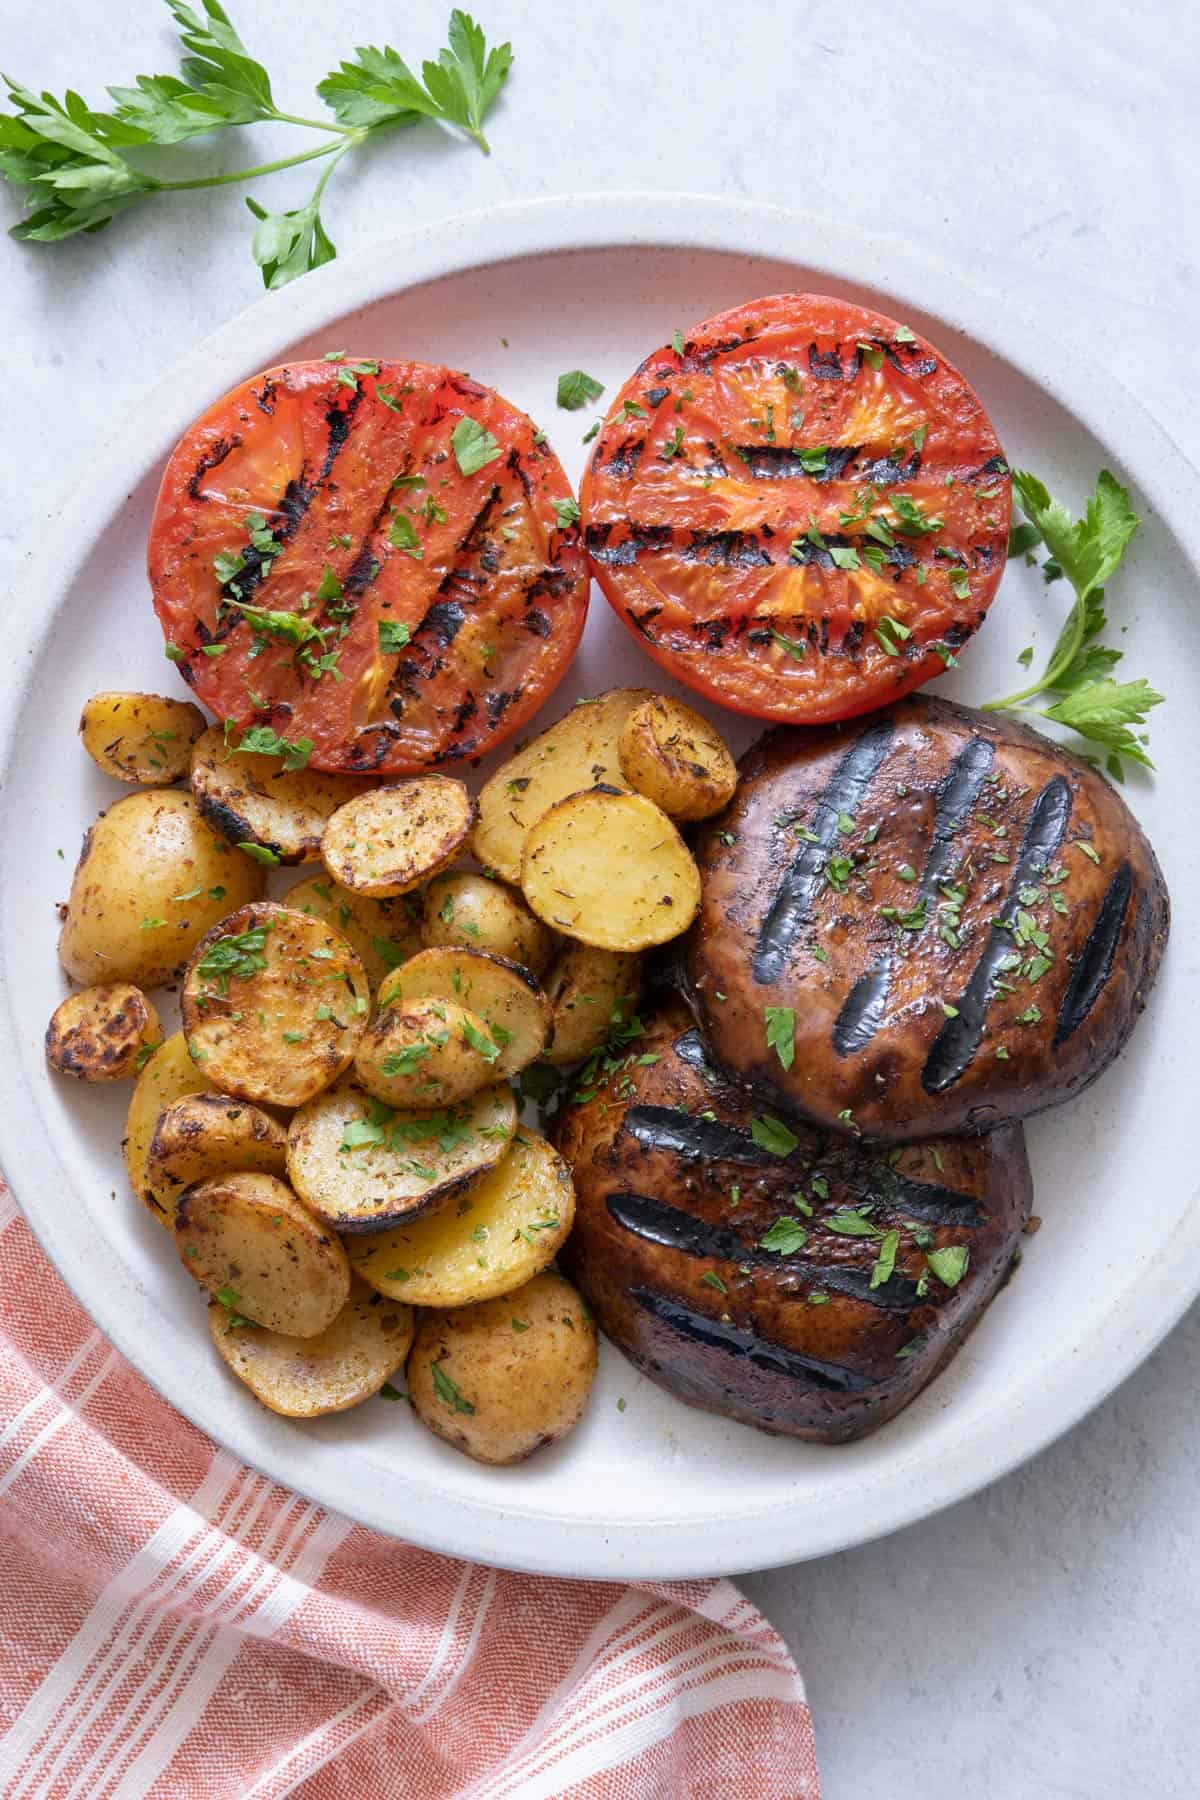 Plate with grilled potatoes, grilled tomatoes, and grilled portabella mushrooms, garnished with fresh parsley.